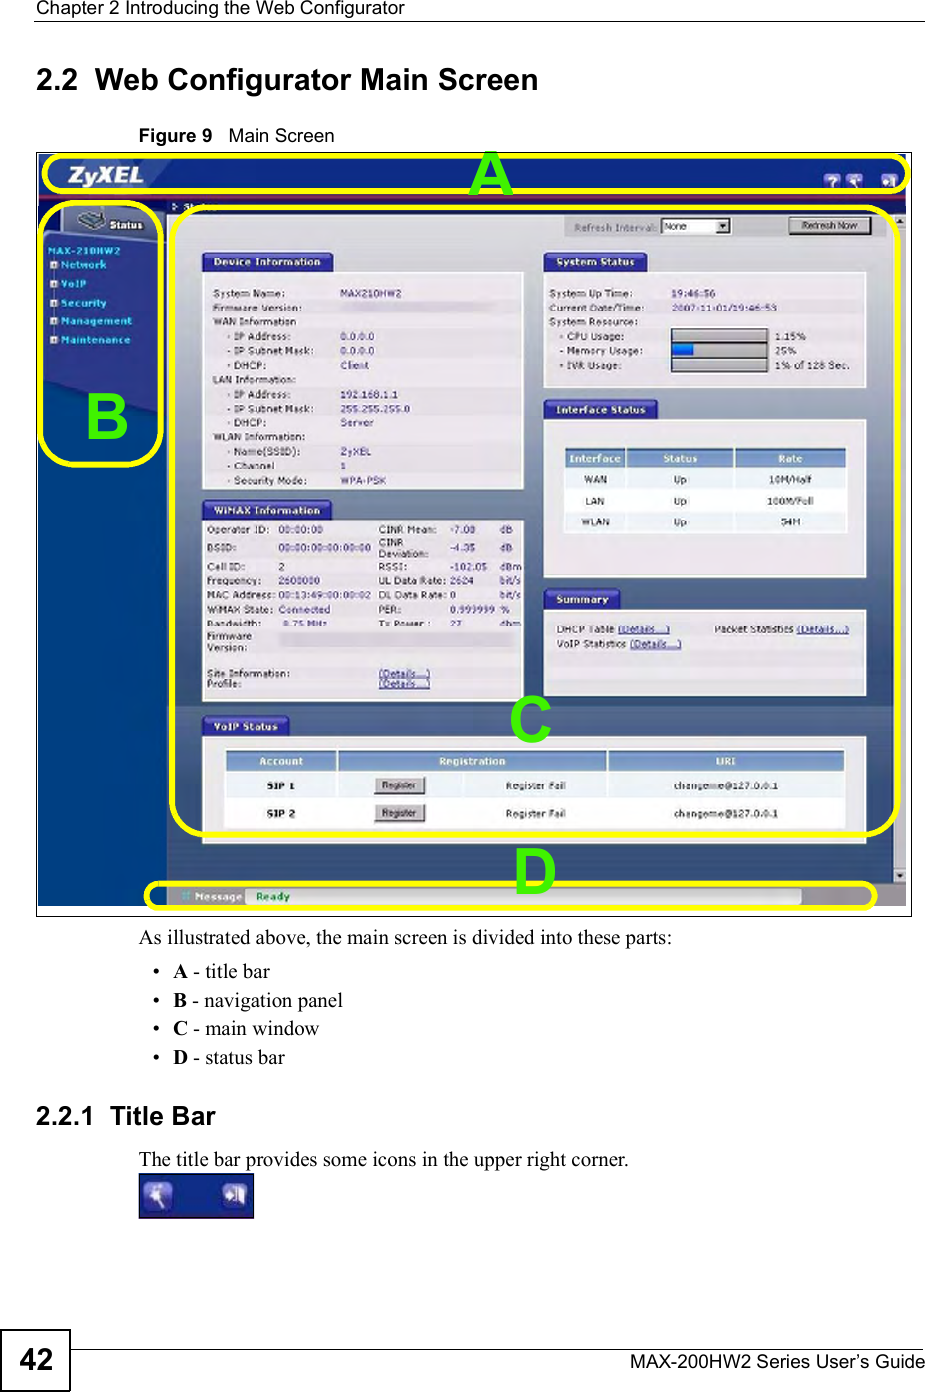 Chapter 2Introducing the Web ConfiguratorMAX-200HW2 Series User s Guide422.2  Web Configurator Main ScreenFigure 9   Main ScreenAs illustrated above, the main screen is divided into these parts: A - title bar B - navigation panel C - main window D - status bar2.2.1  Title BarThe title bar provides some icons in the upper right corner.CBAD